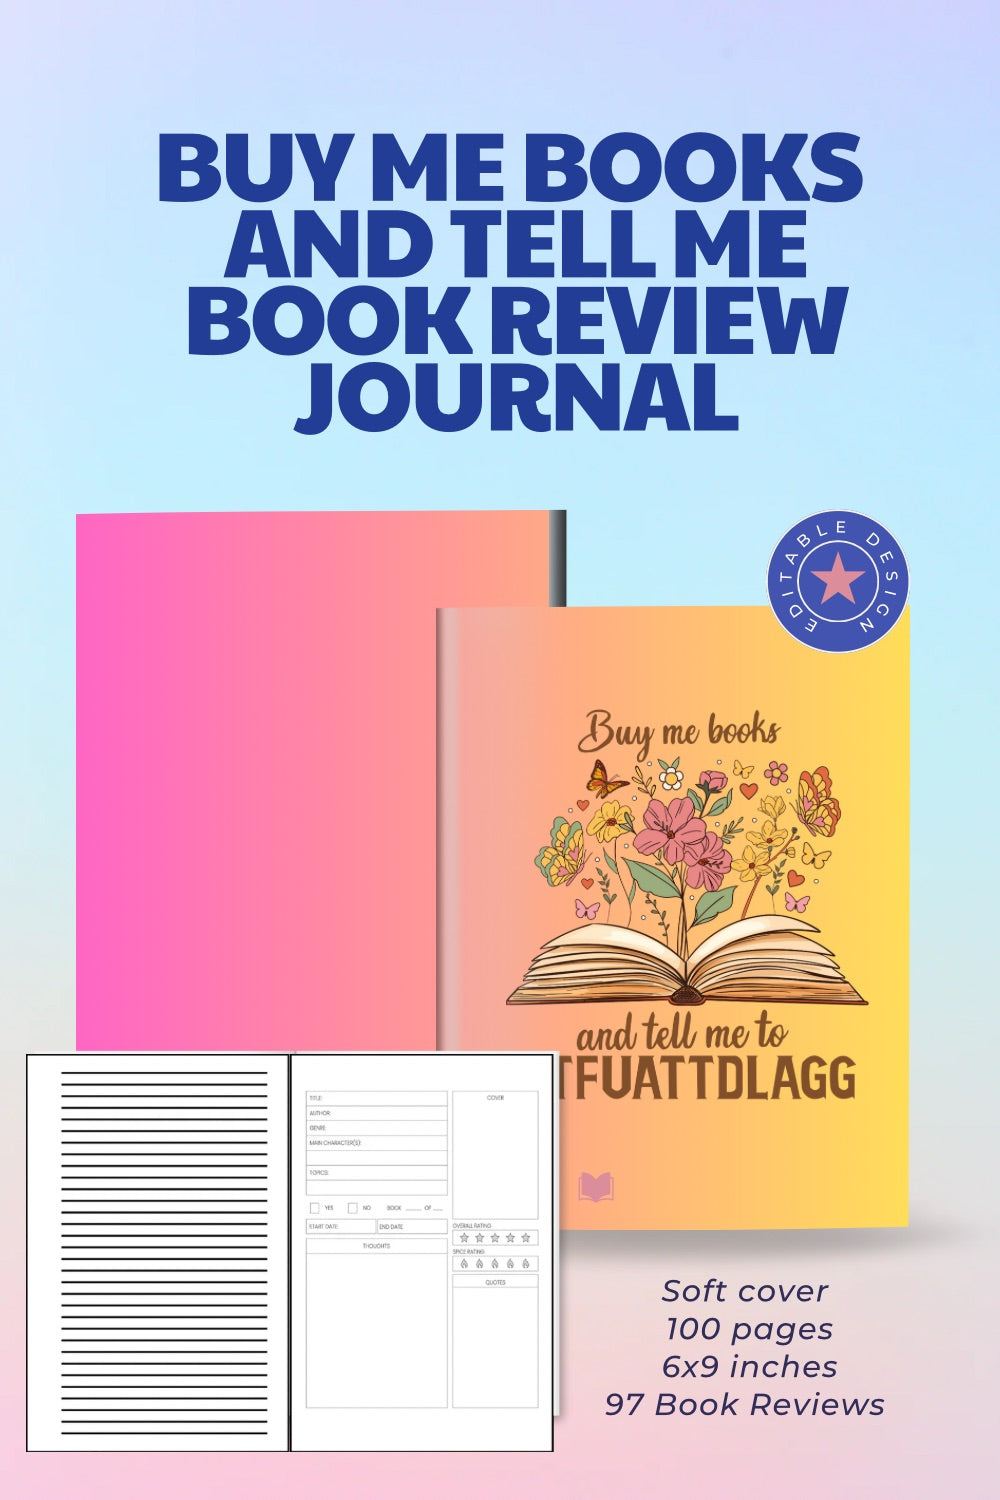 Buy Me Books and Tell Me To STFUATTDLAGG Book Review Journal